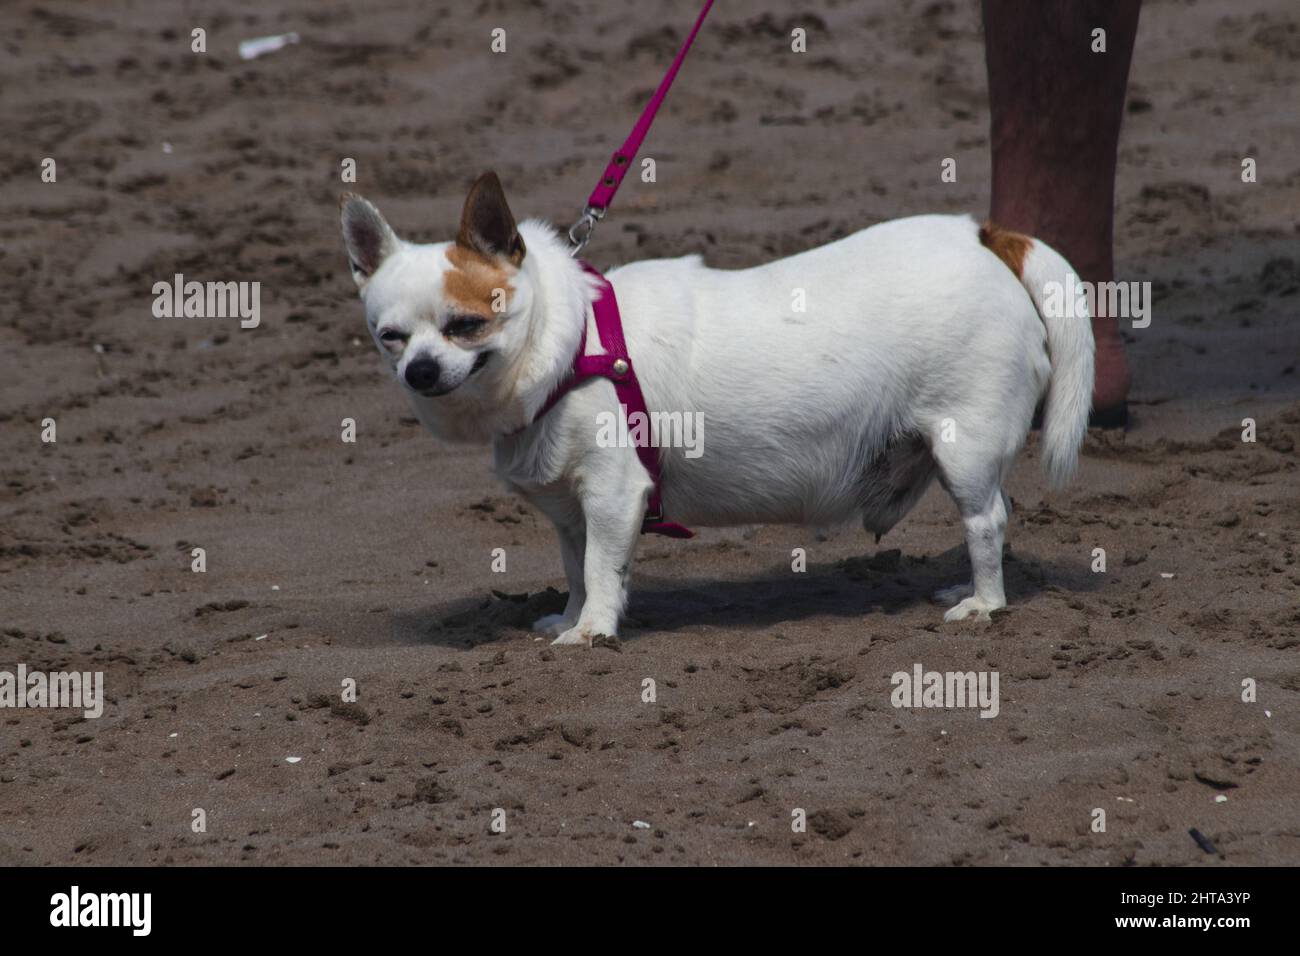 Pembroke Welsh Corgi dog standing on the beach and smiling with a red collar on Stock Photo